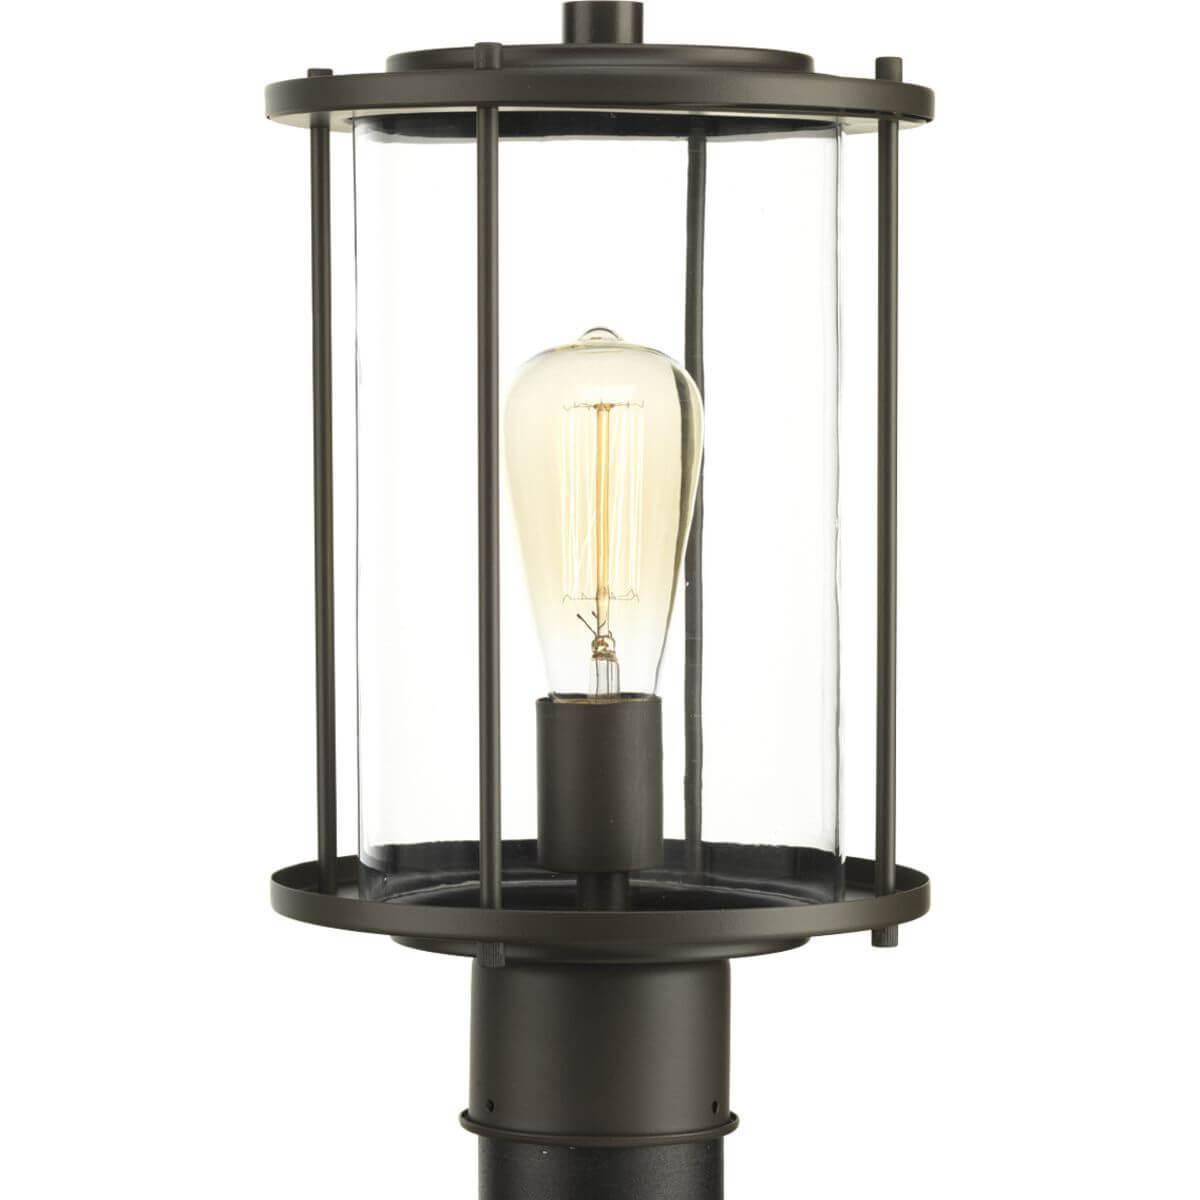 Progress Lighting P540020-020 Gunther 1 Light 14 inch Tall Outdoor Post Lantern in Antique Bronze with Clear Glass